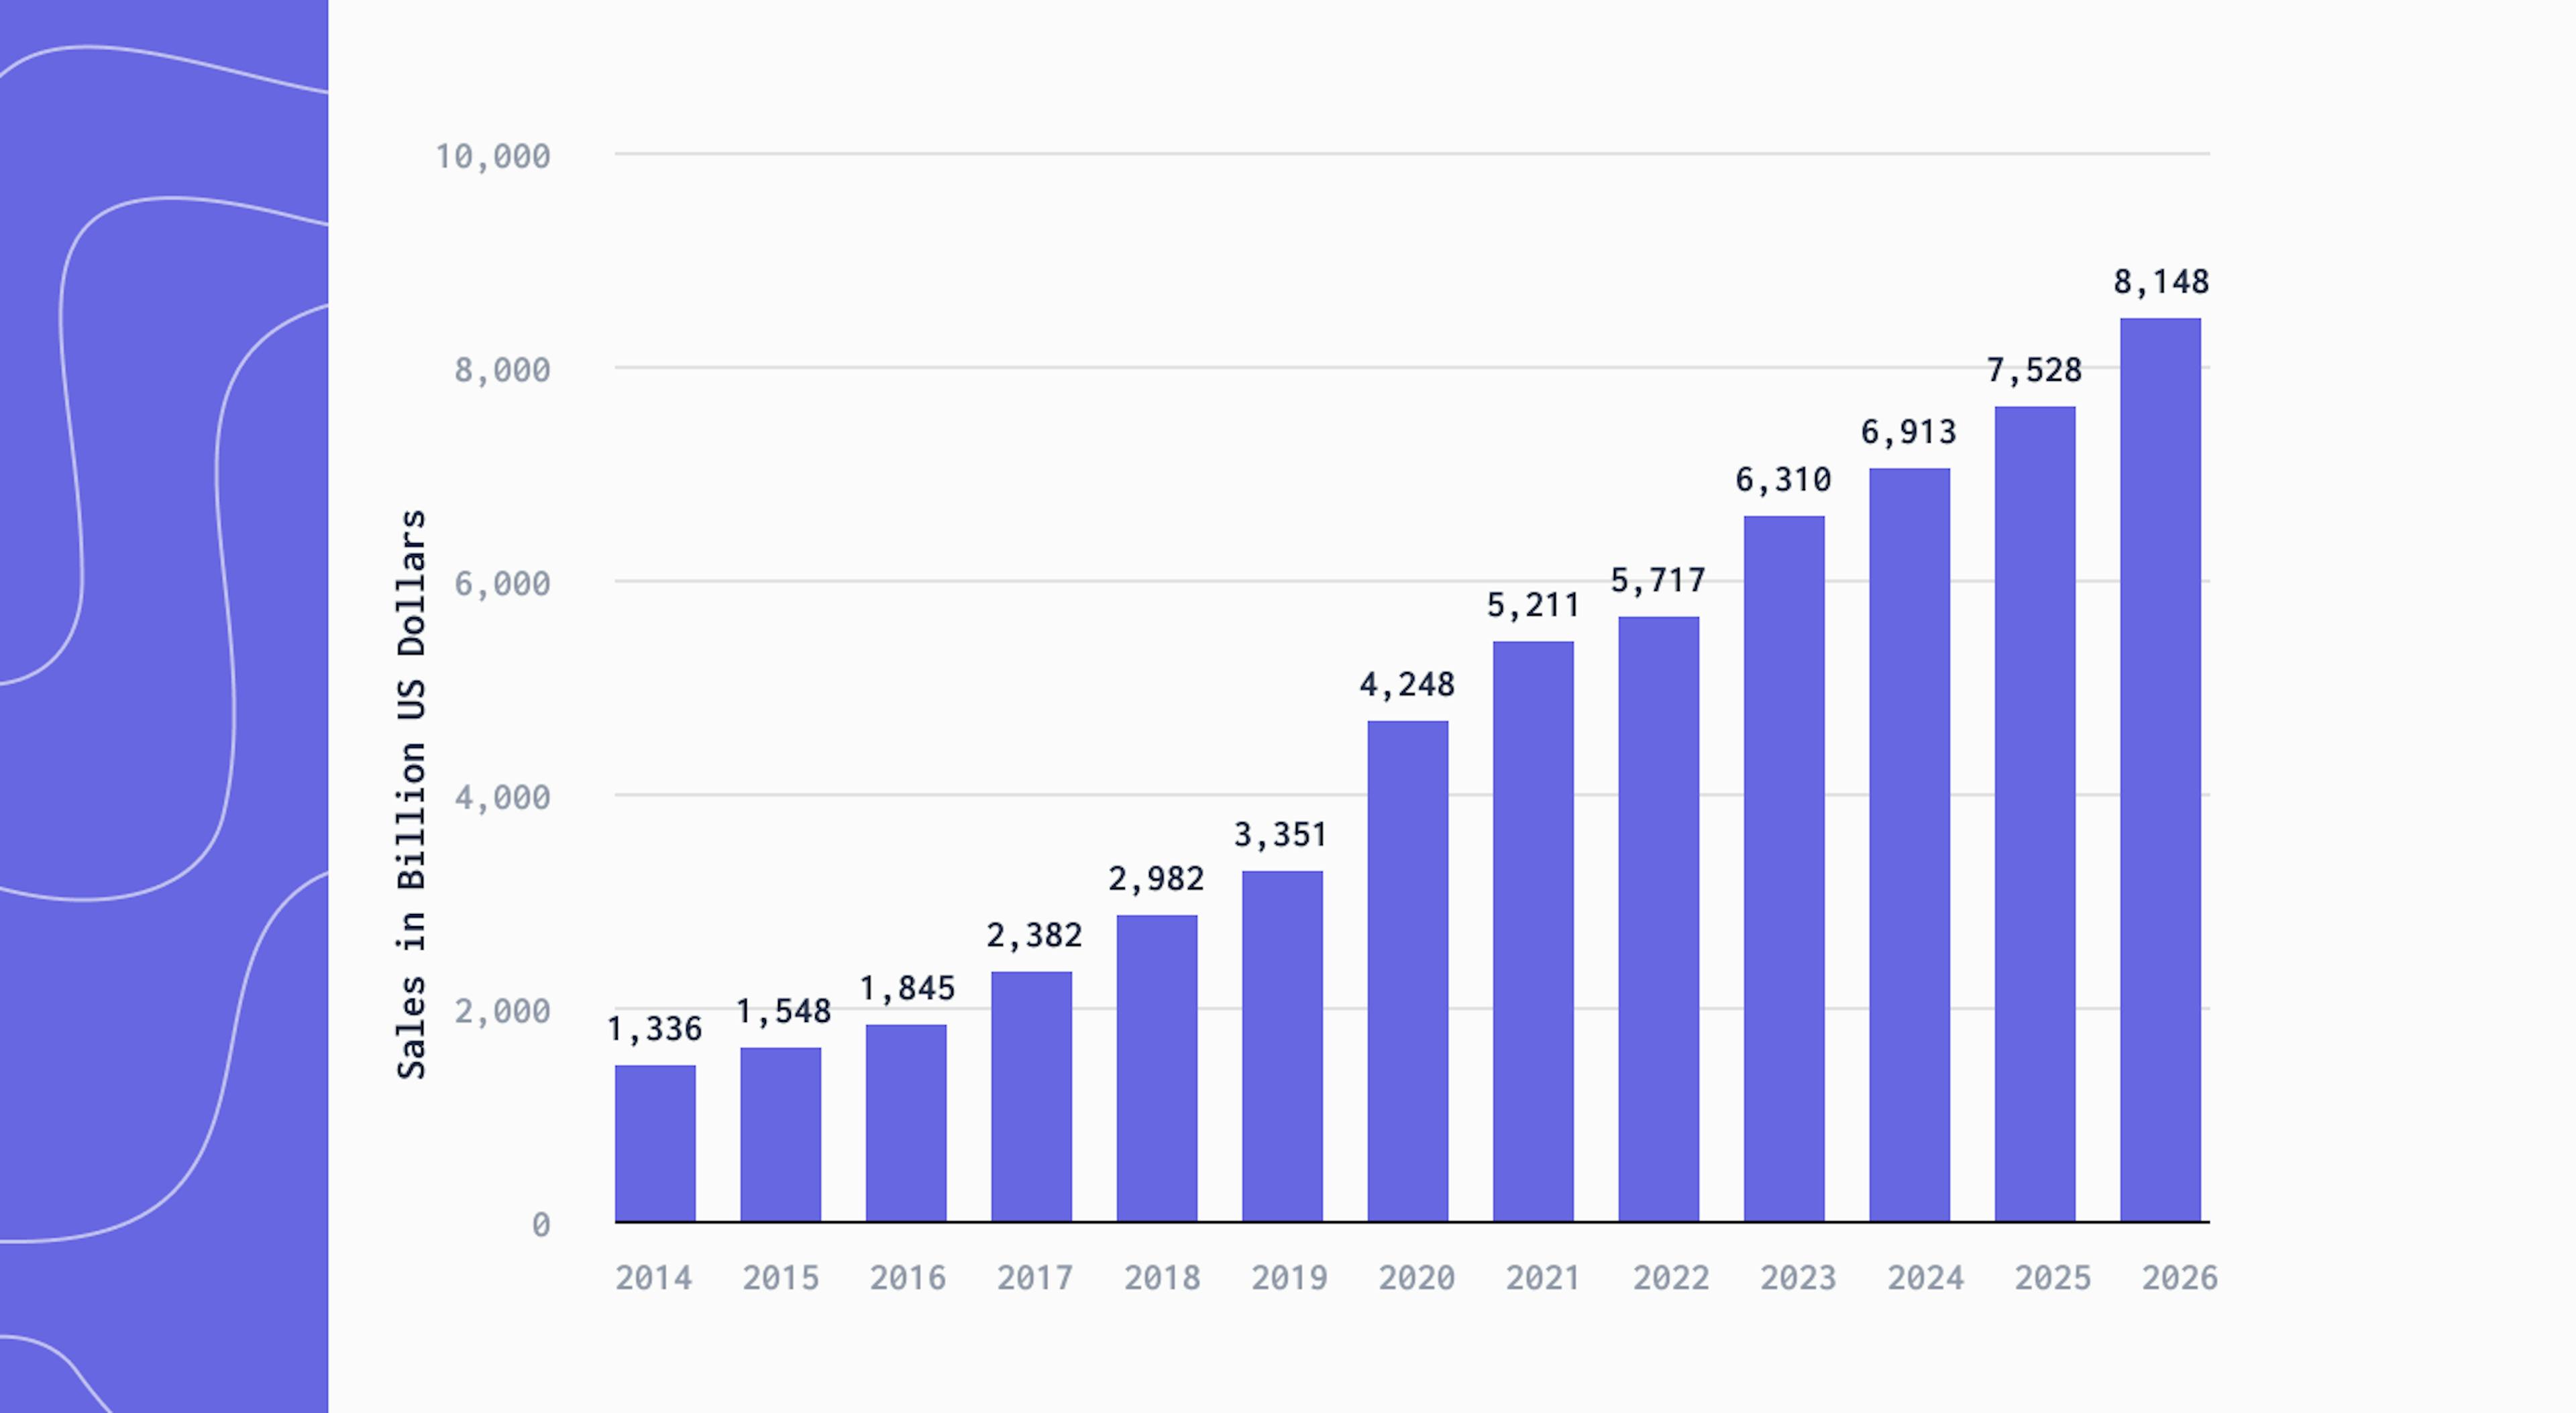 Fig. 1. Worldwide e-commerce retail sales from 2014 to 2026. Source: Statista